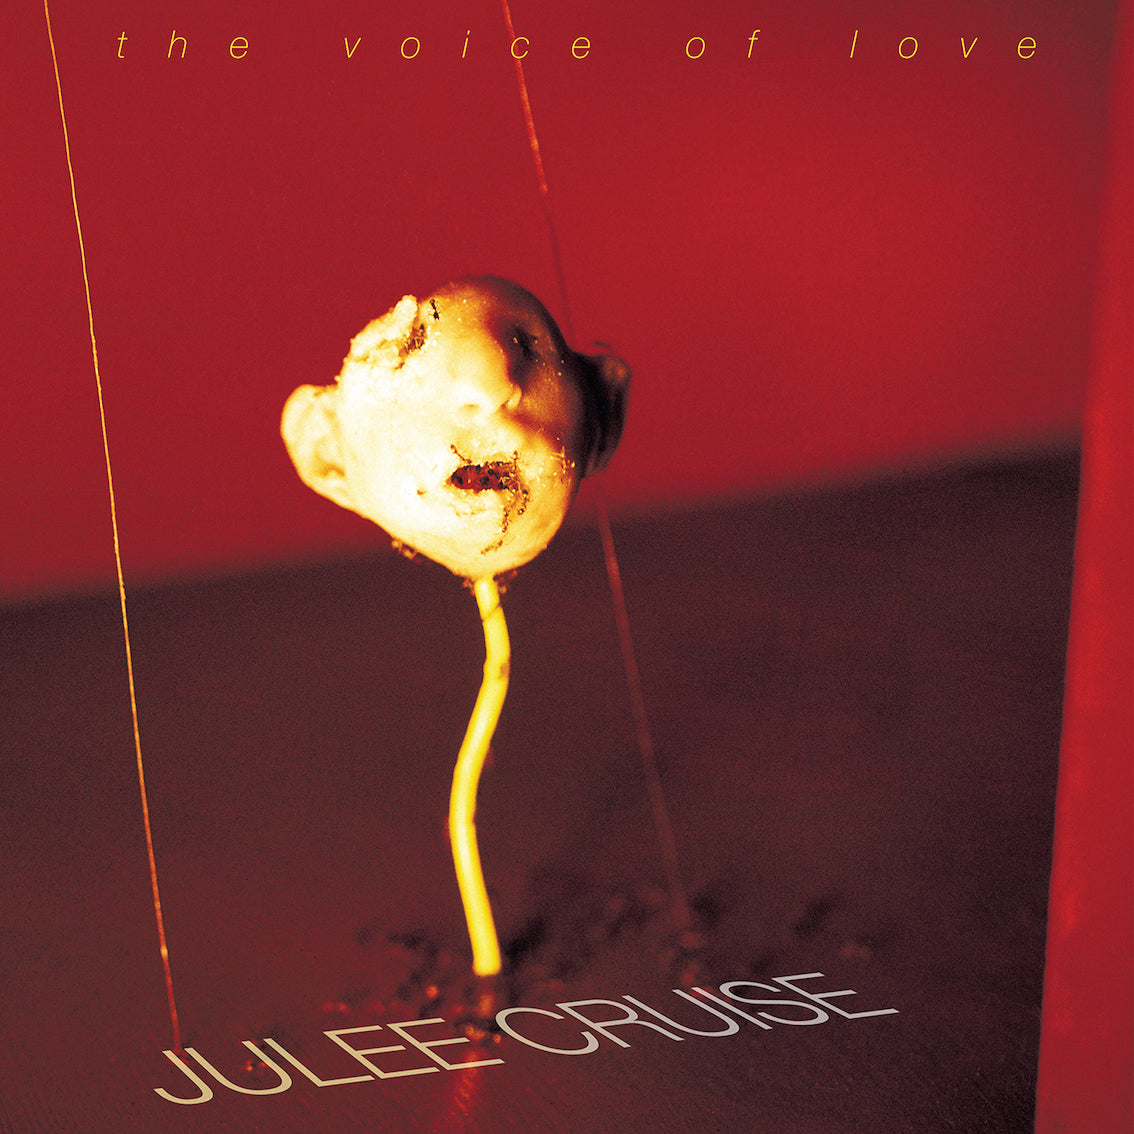 Julee Cruise - The Voice of Love (2xLP)